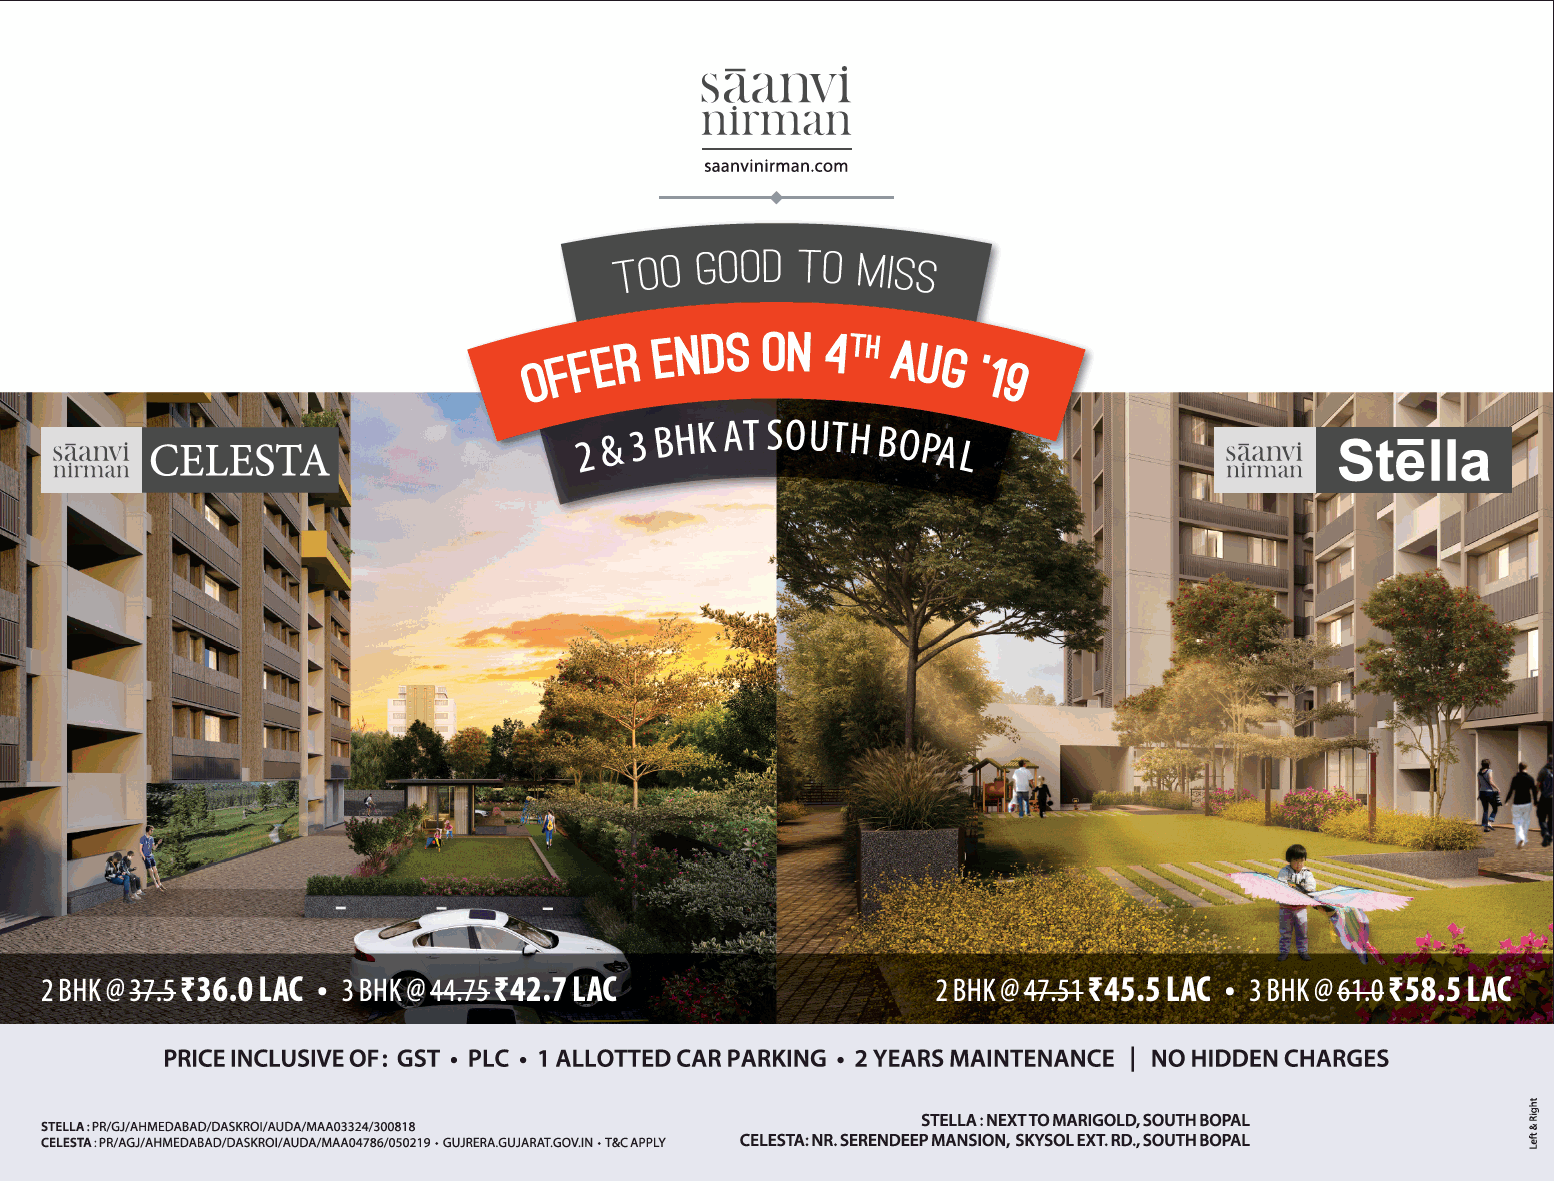 Saanvi Nirman offer ends on 4th Aug 19, 2 & 3 BHK at South Bhopal, Ahmedabad Update